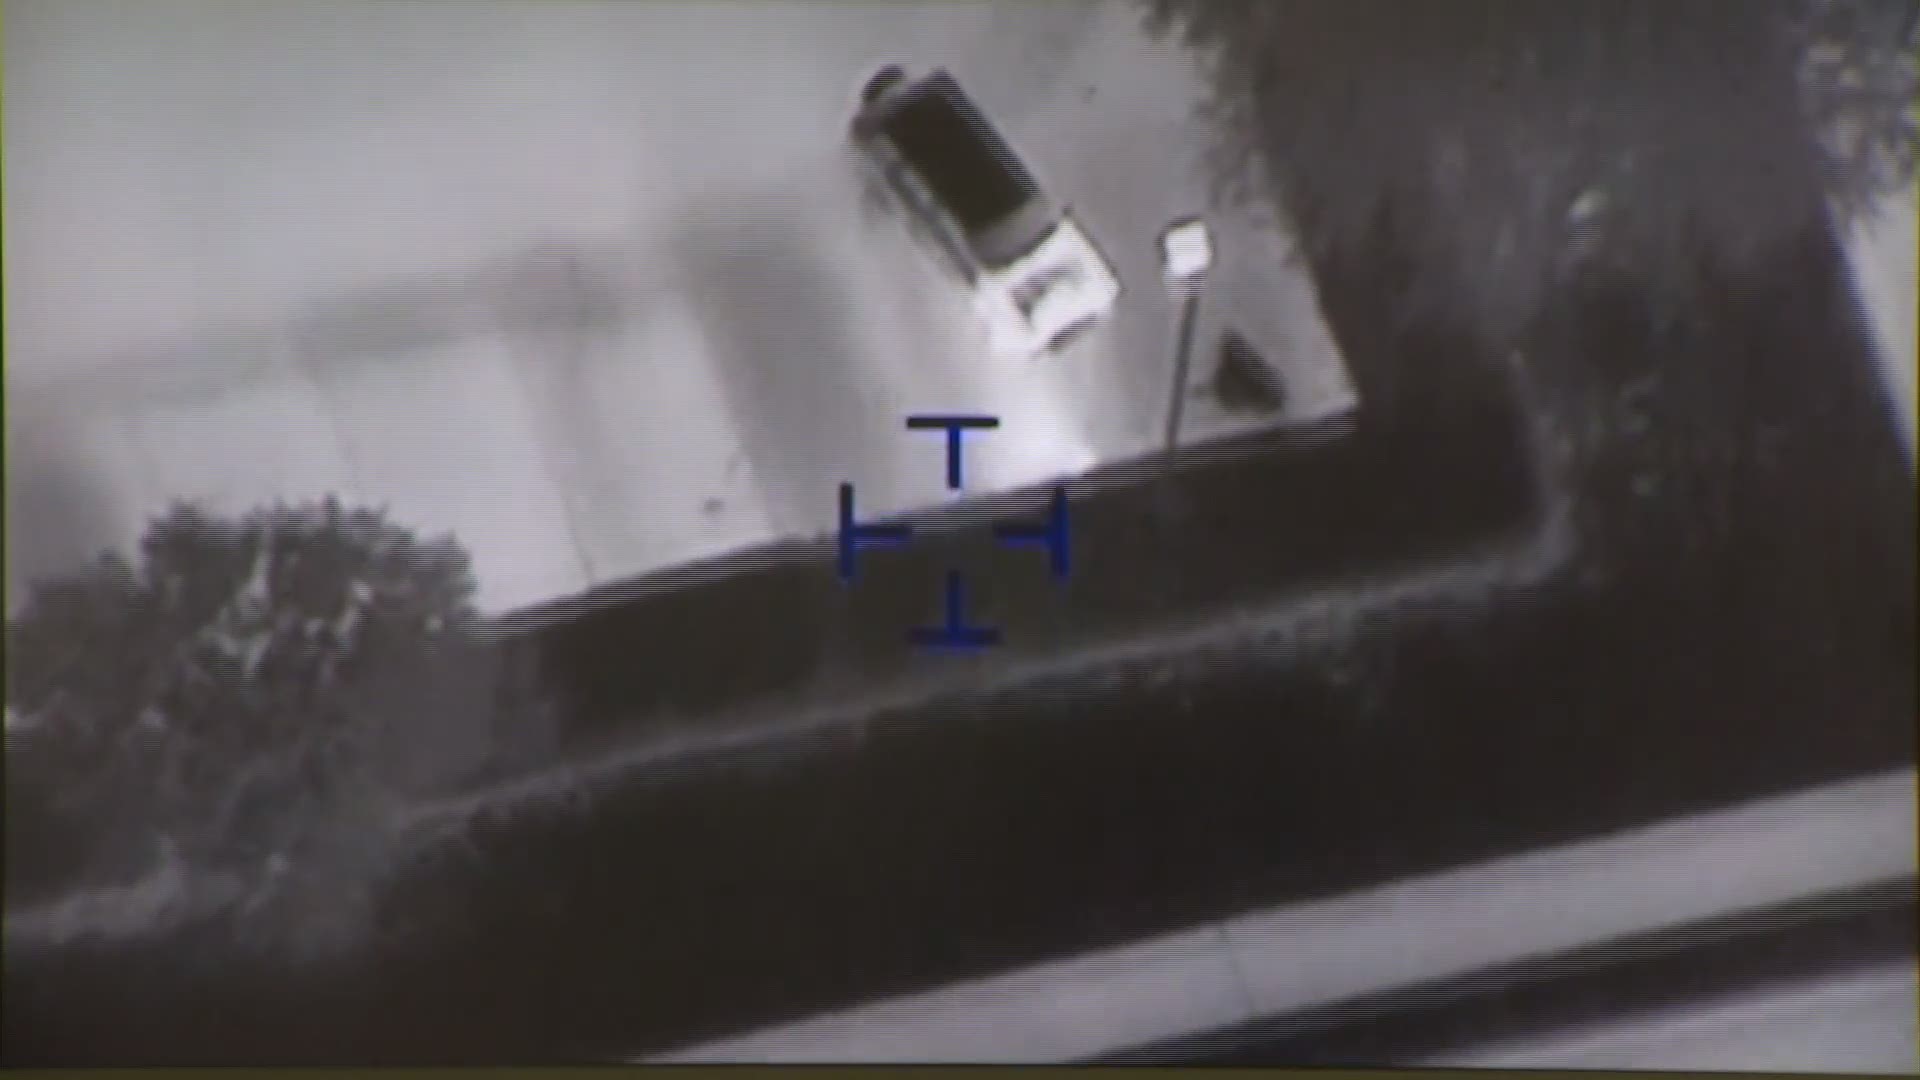 State officials Friday released helicopter video showing the moments before the serial bomber that targeted Austin killed himself in March as police approached. Watch the video here.